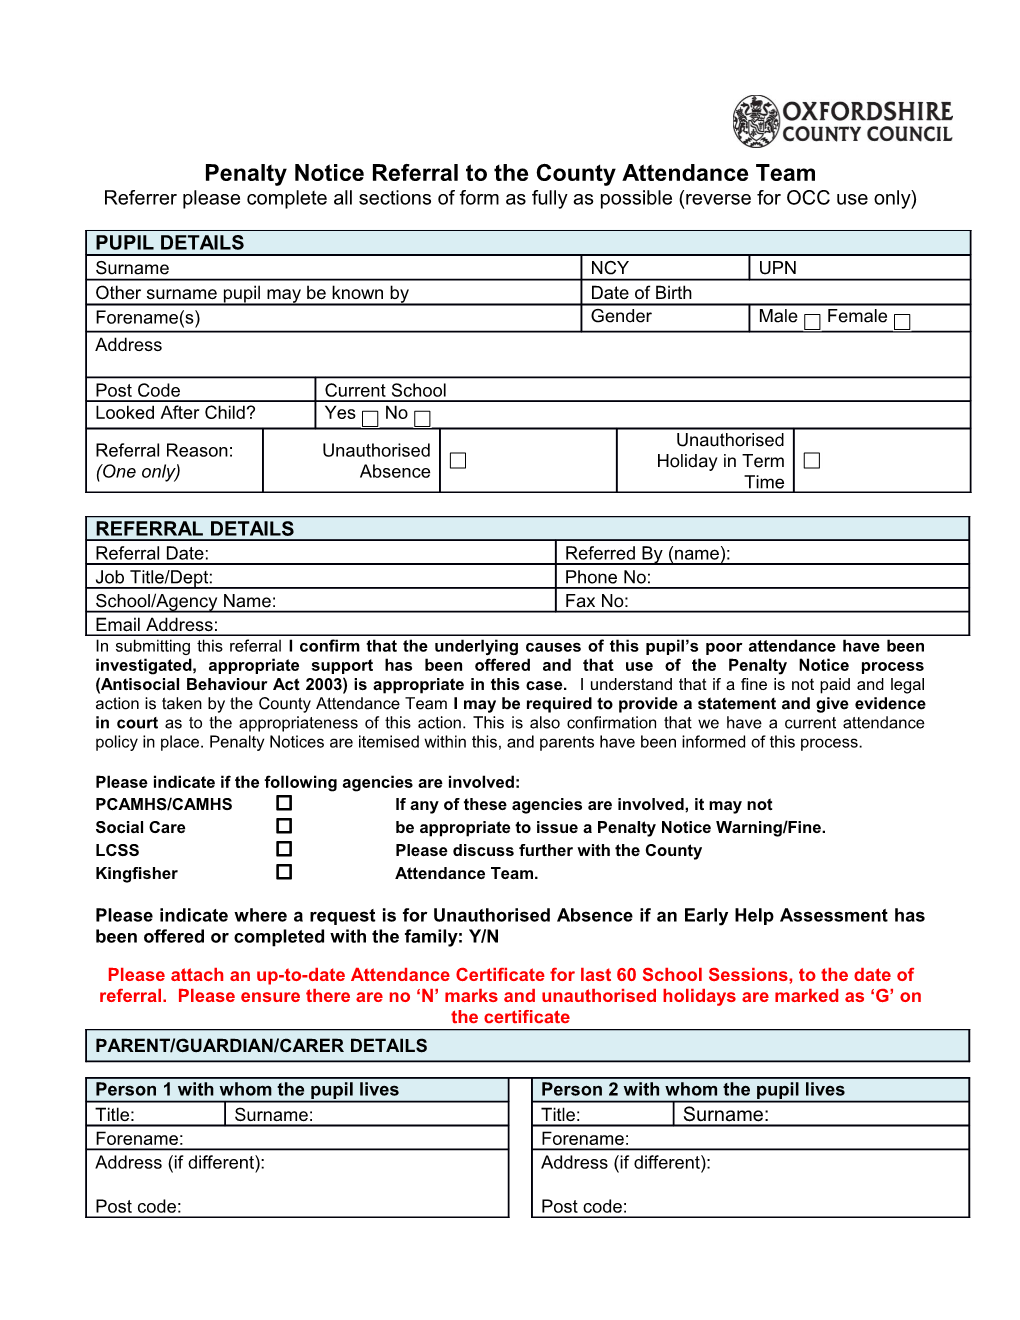 Penalty Notice Referral to the County Attendanceteam